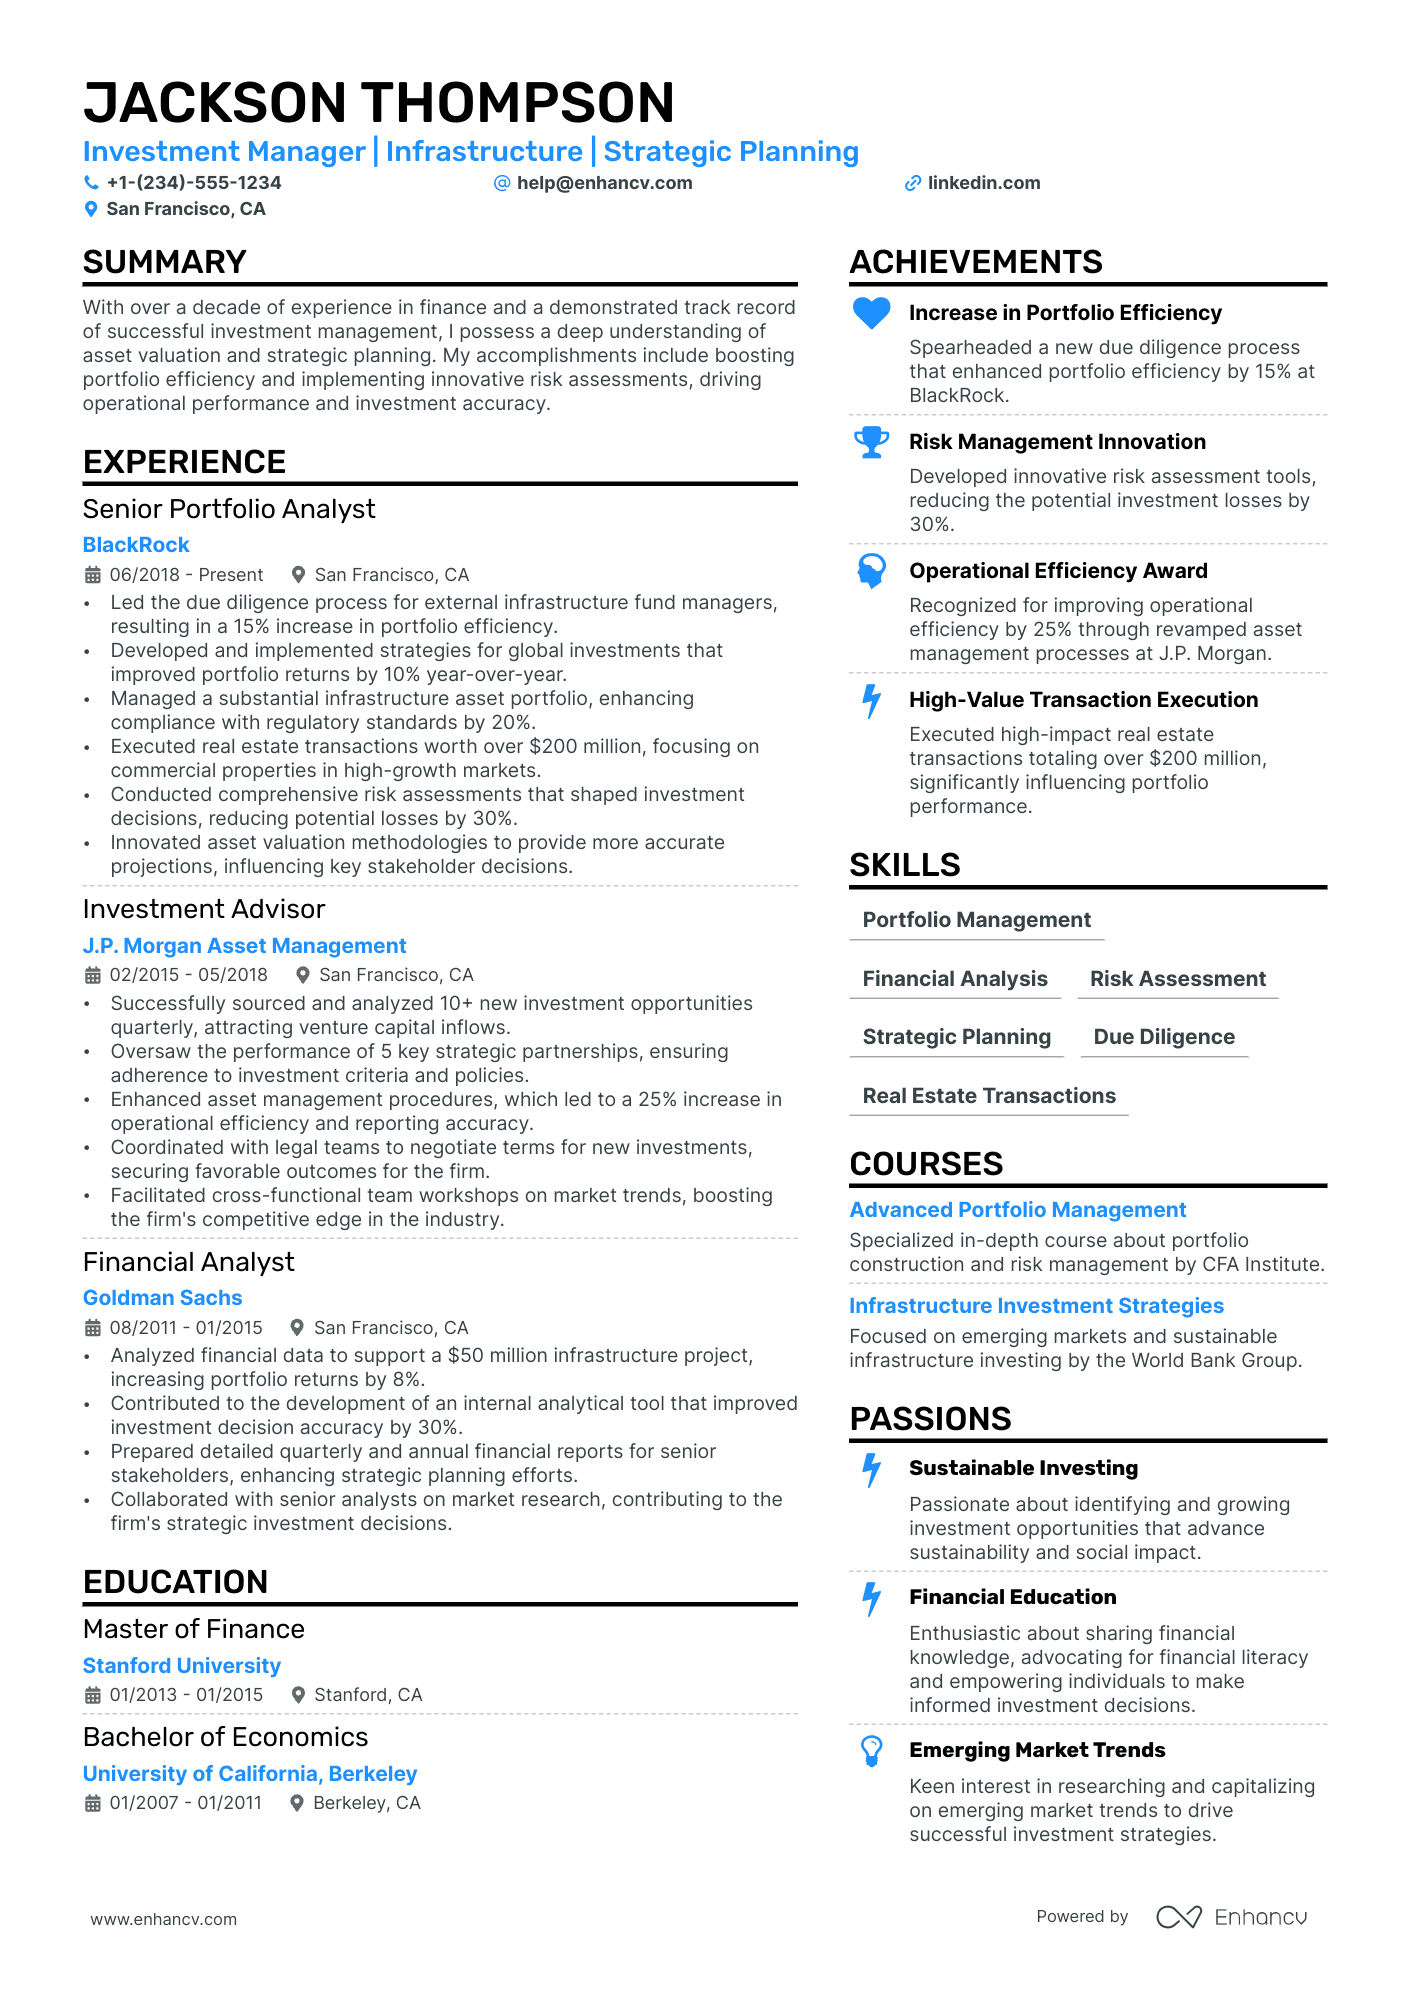 Investment Manager resume example